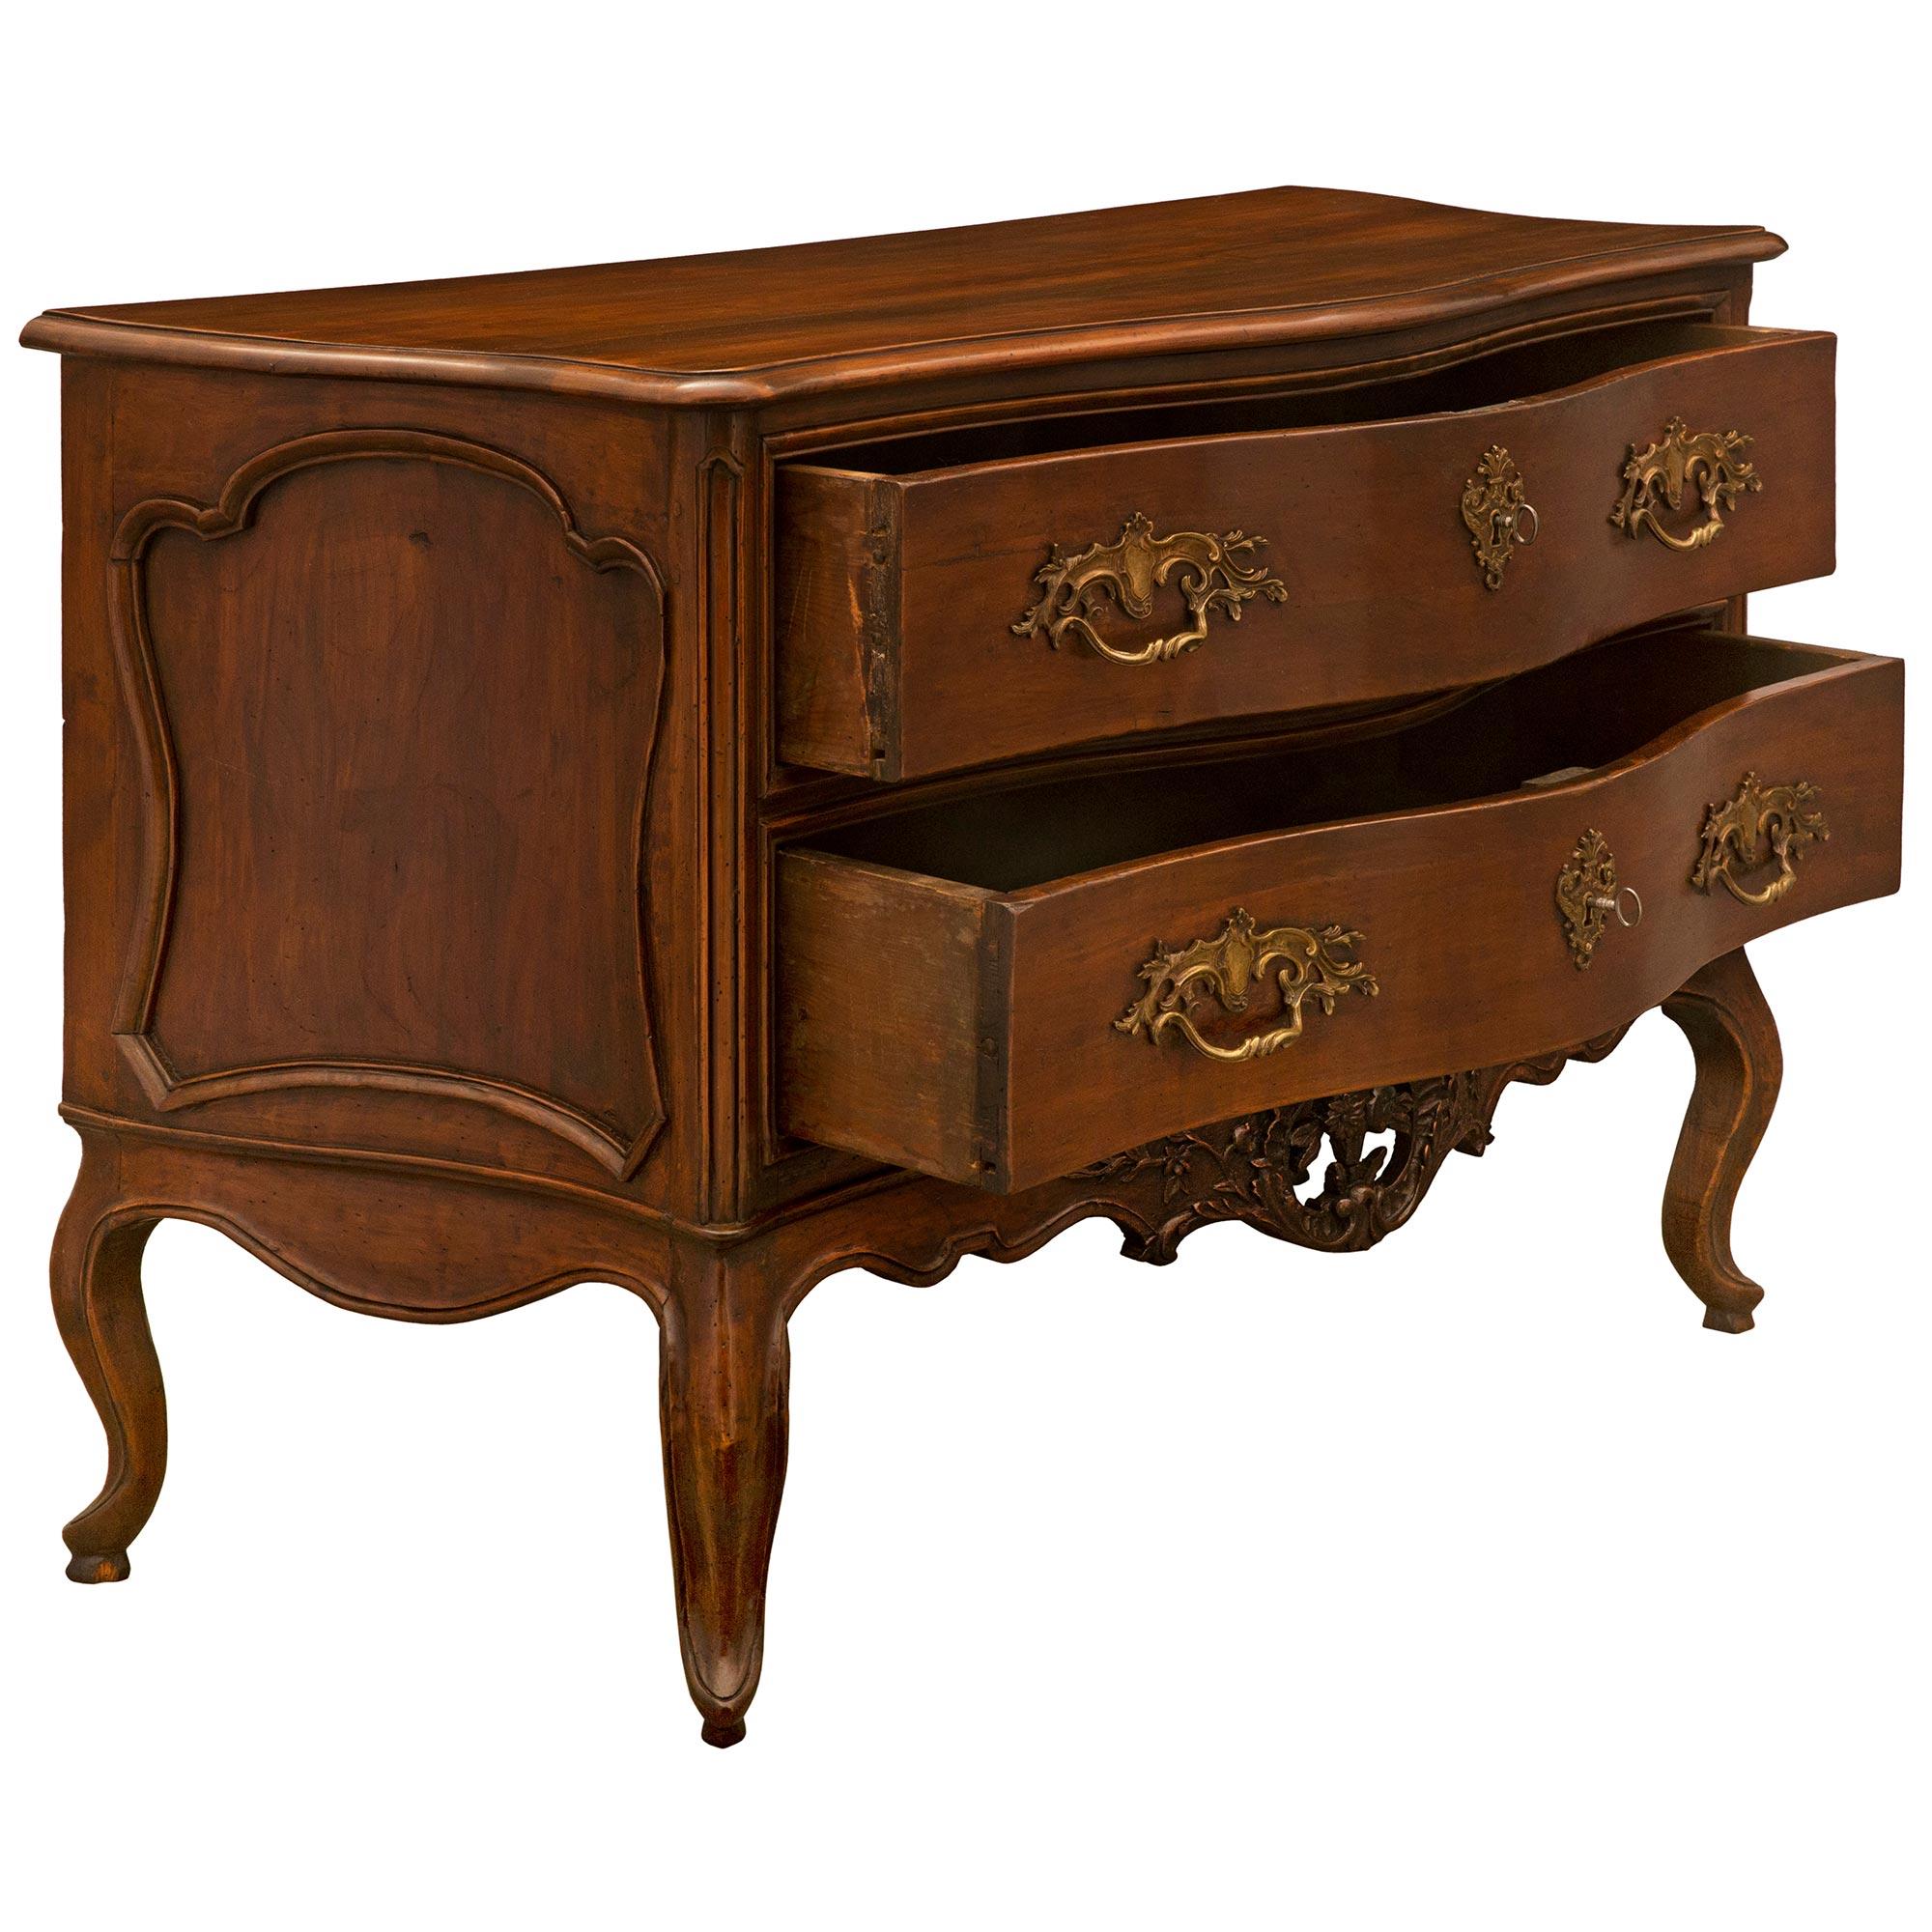 French 18th Century Louis XV Period Walnut Commode In Good Condition For Sale In West Palm Beach, FL